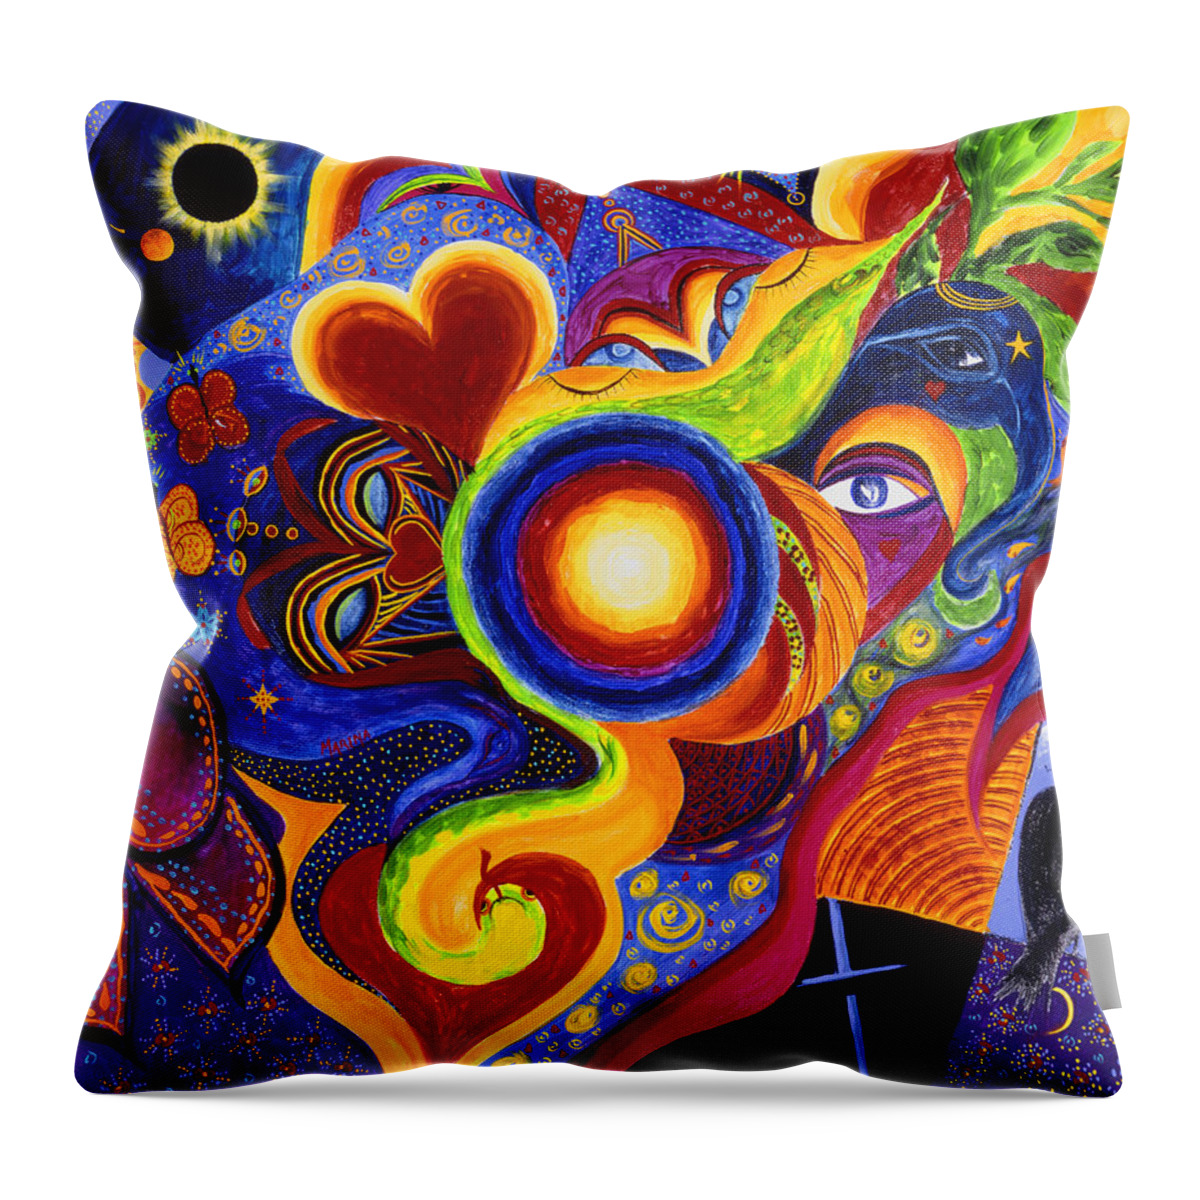 Abstract Throw Pillow featuring the painting Magical Eclipse by Marina Petro